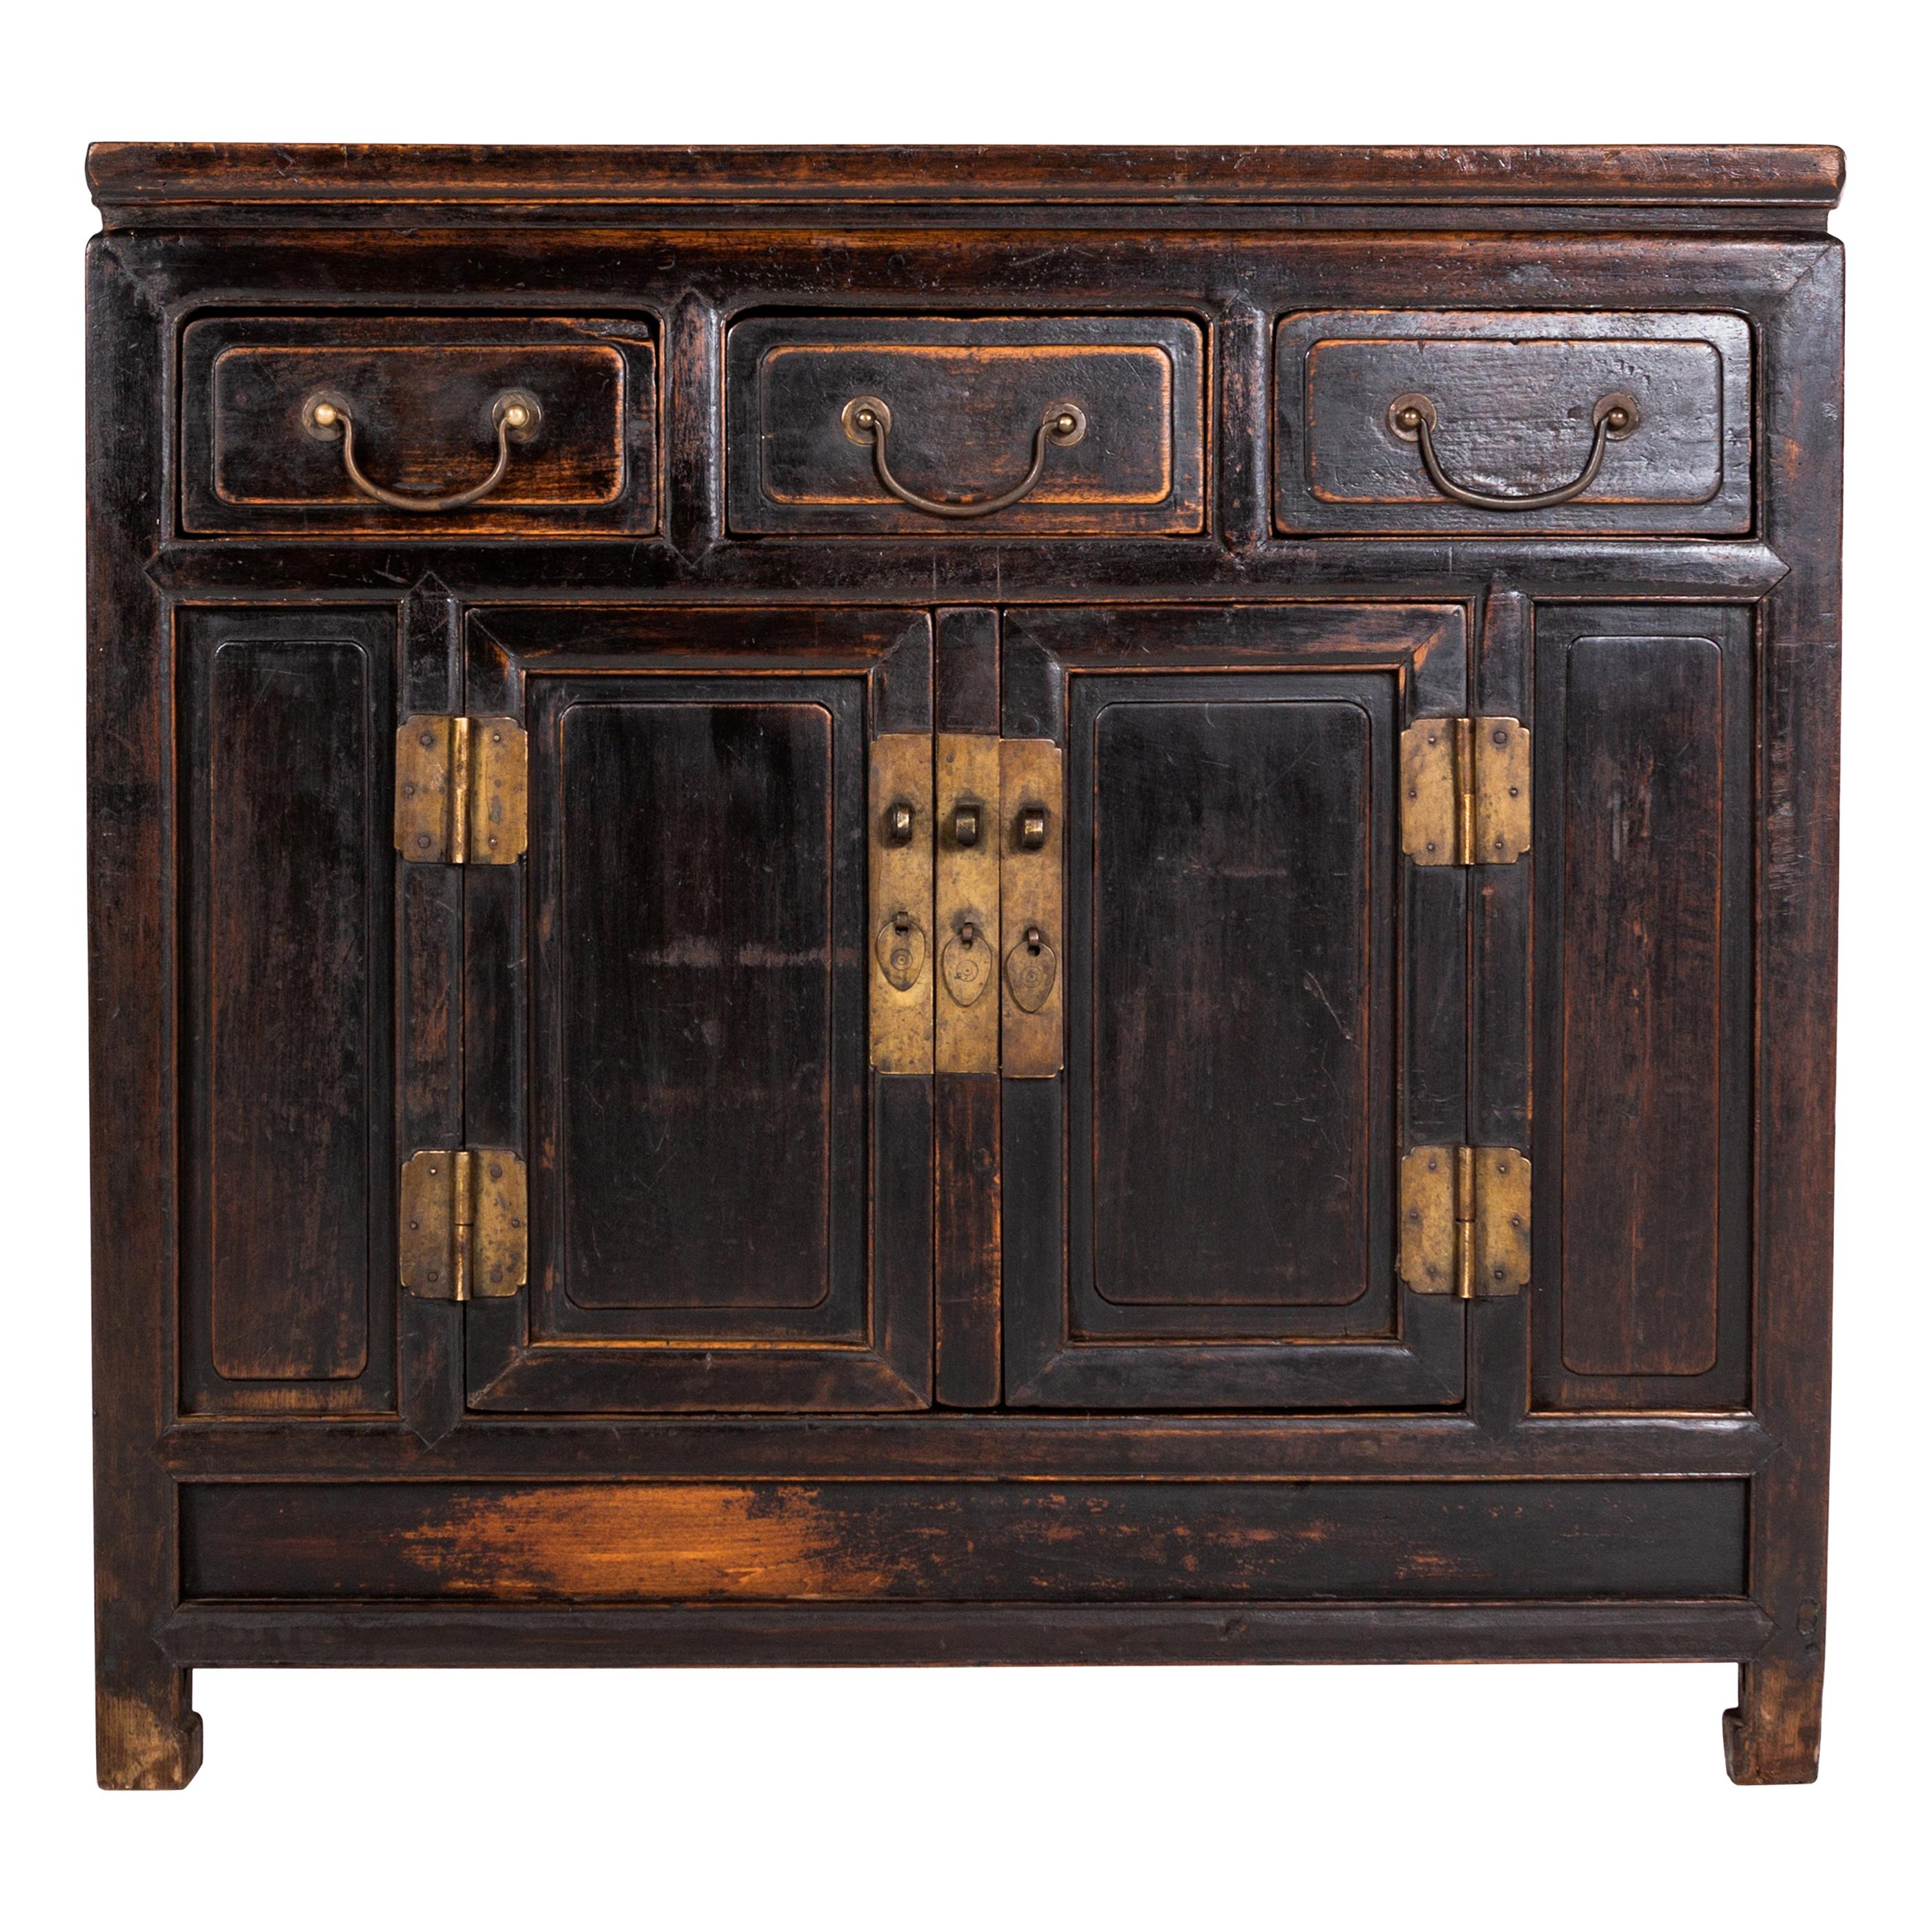 Qing Dynasty Cabinet with Three Drawers and a Pair of Doors